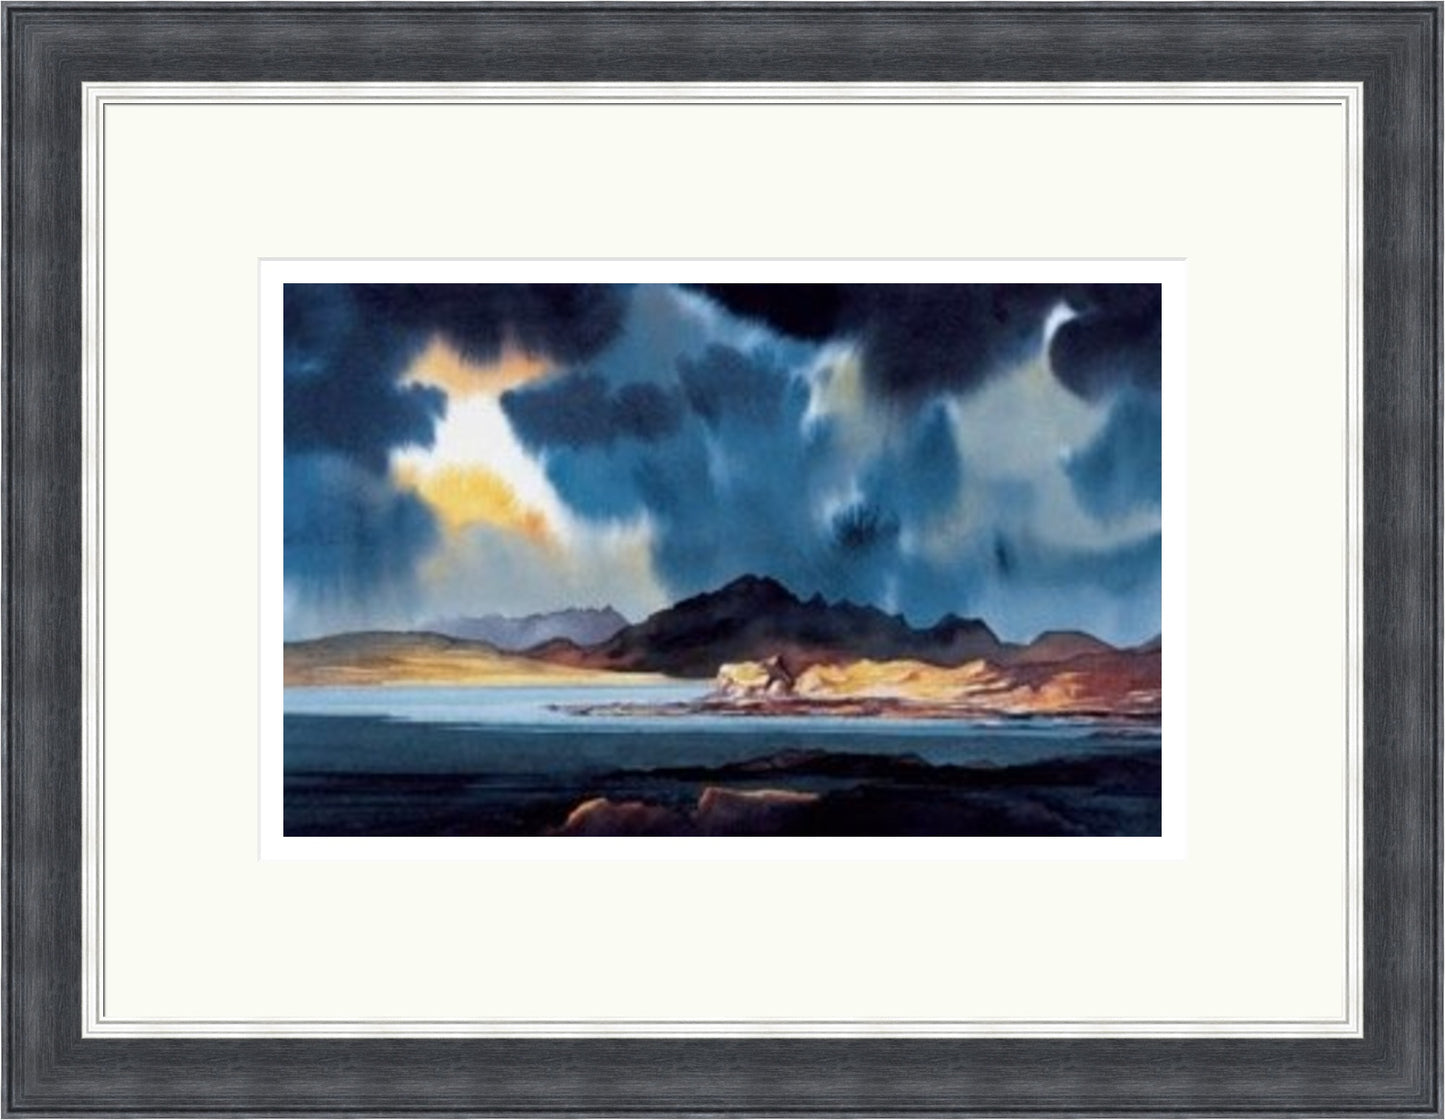 Dunseath Castle Awaits The Storm (Limited Edition) by Peter McDermott